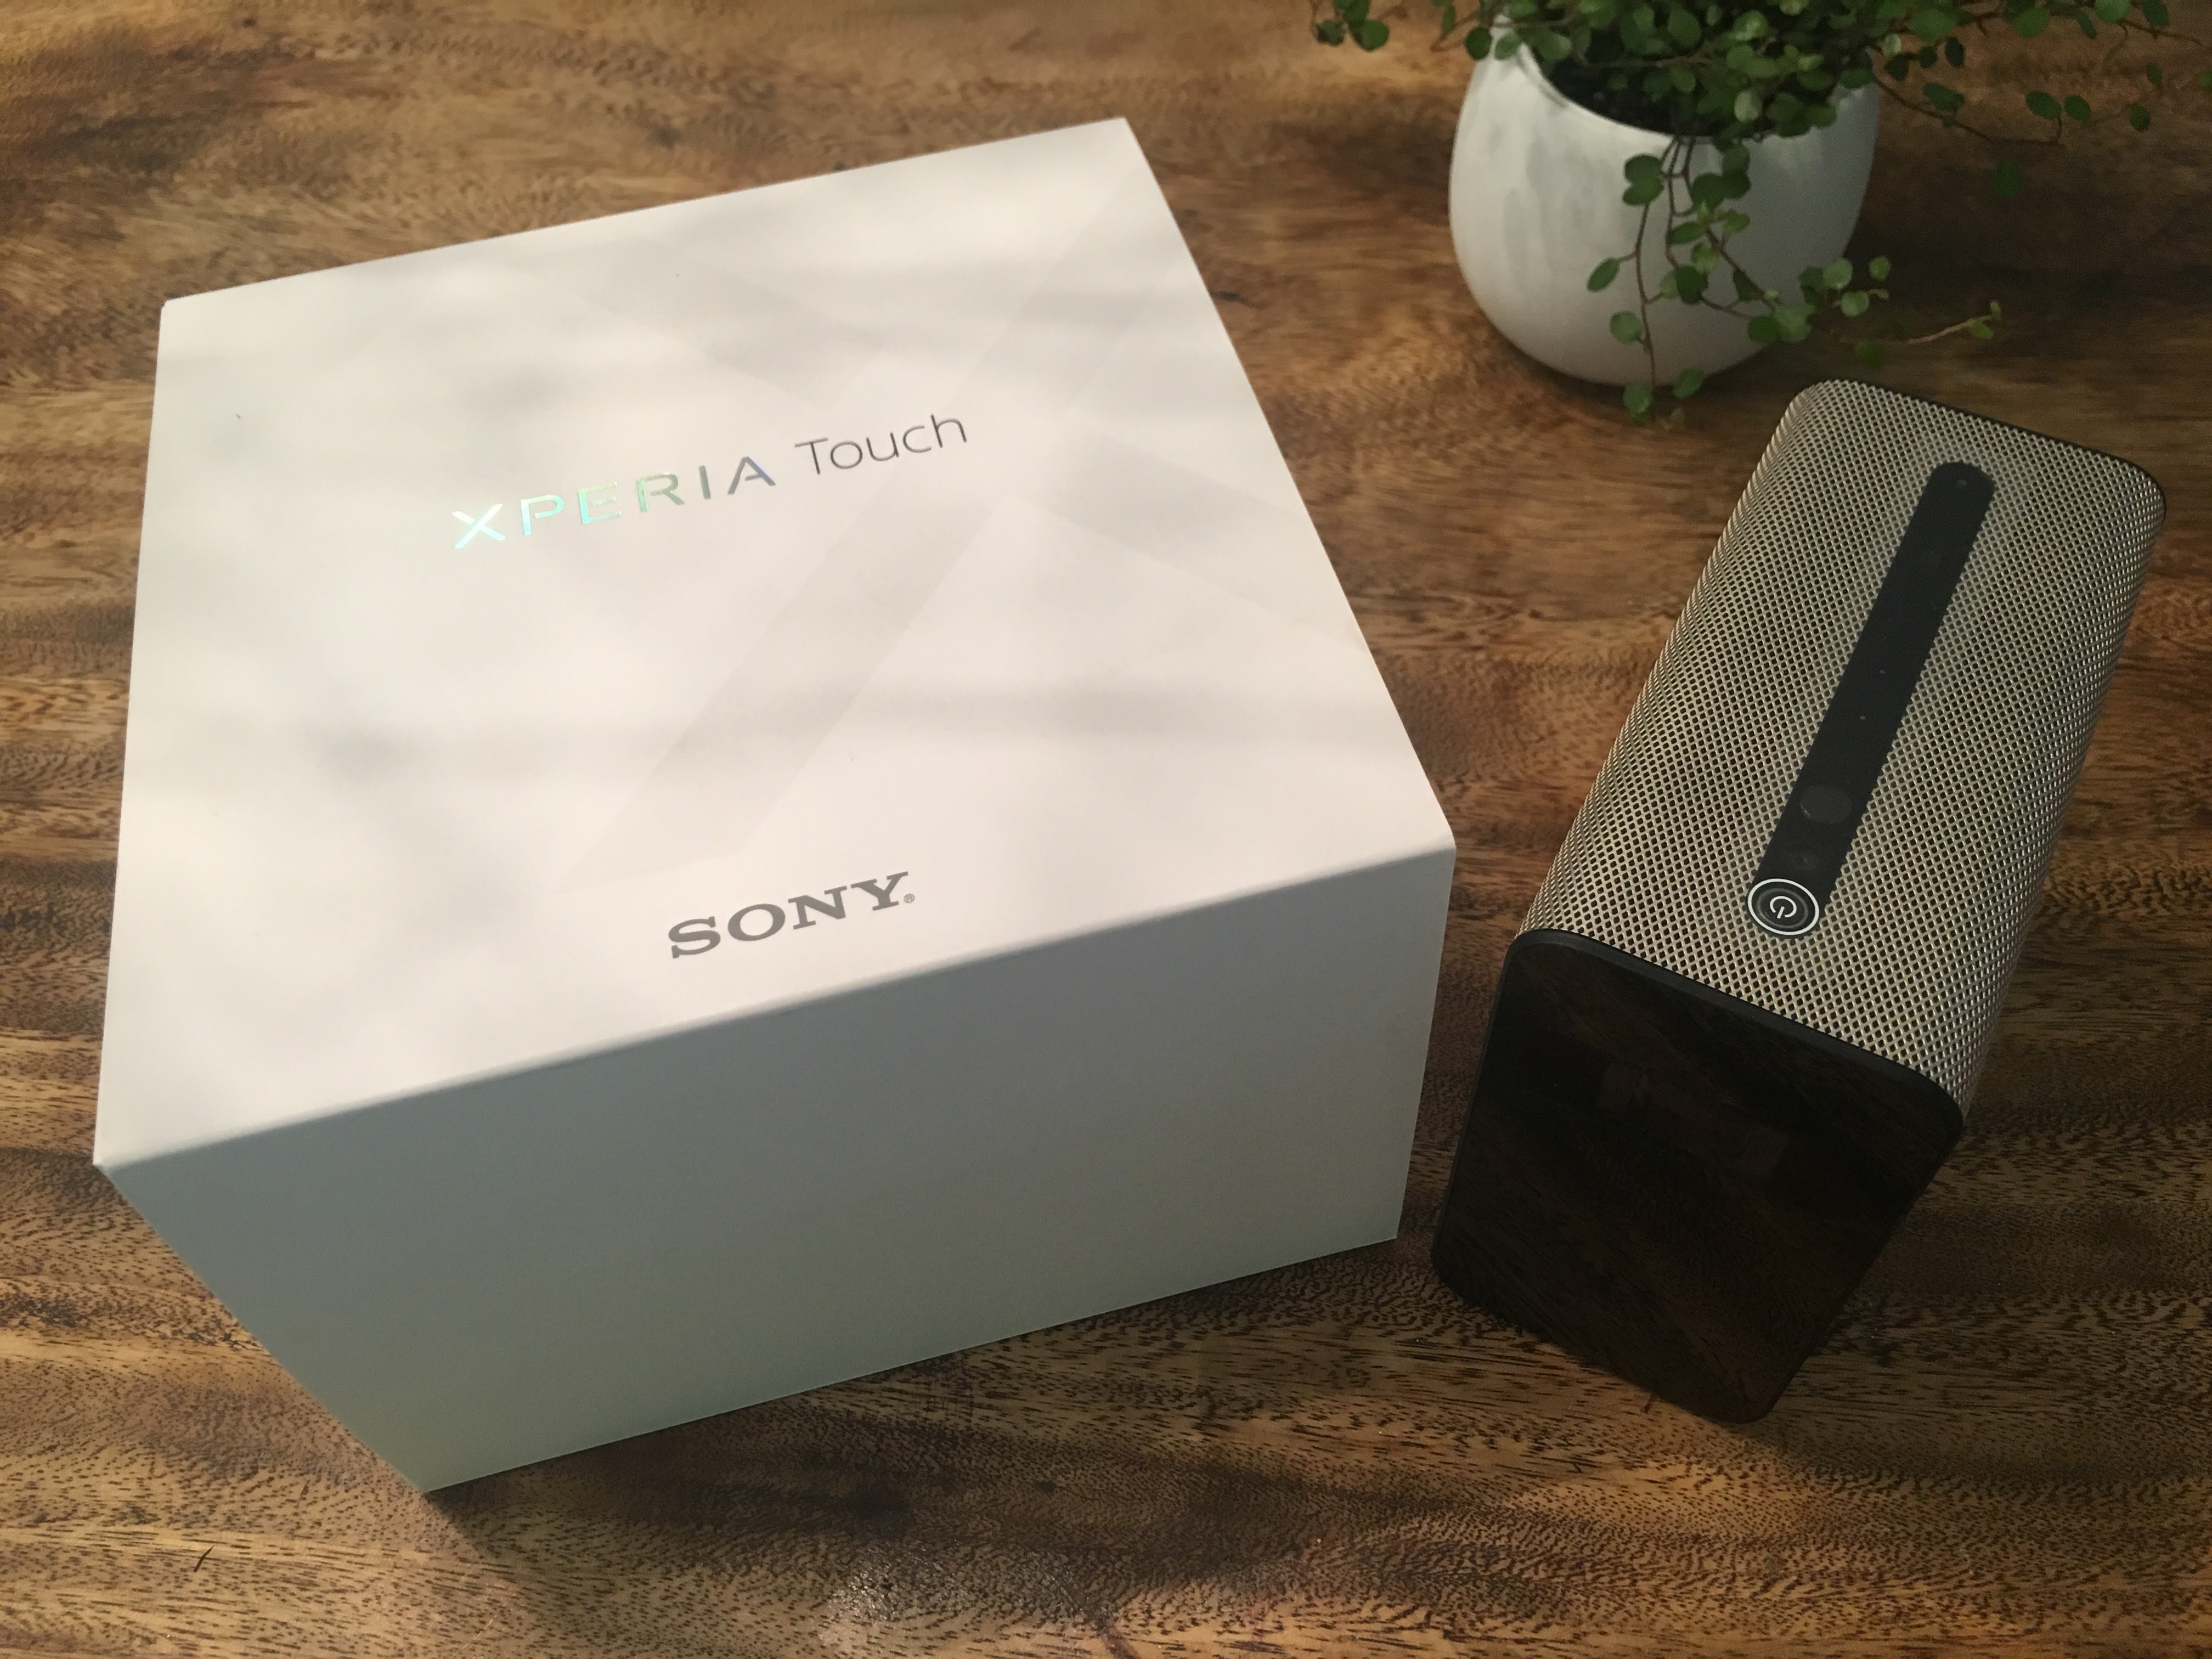 「Xperia touch」の箱と本体